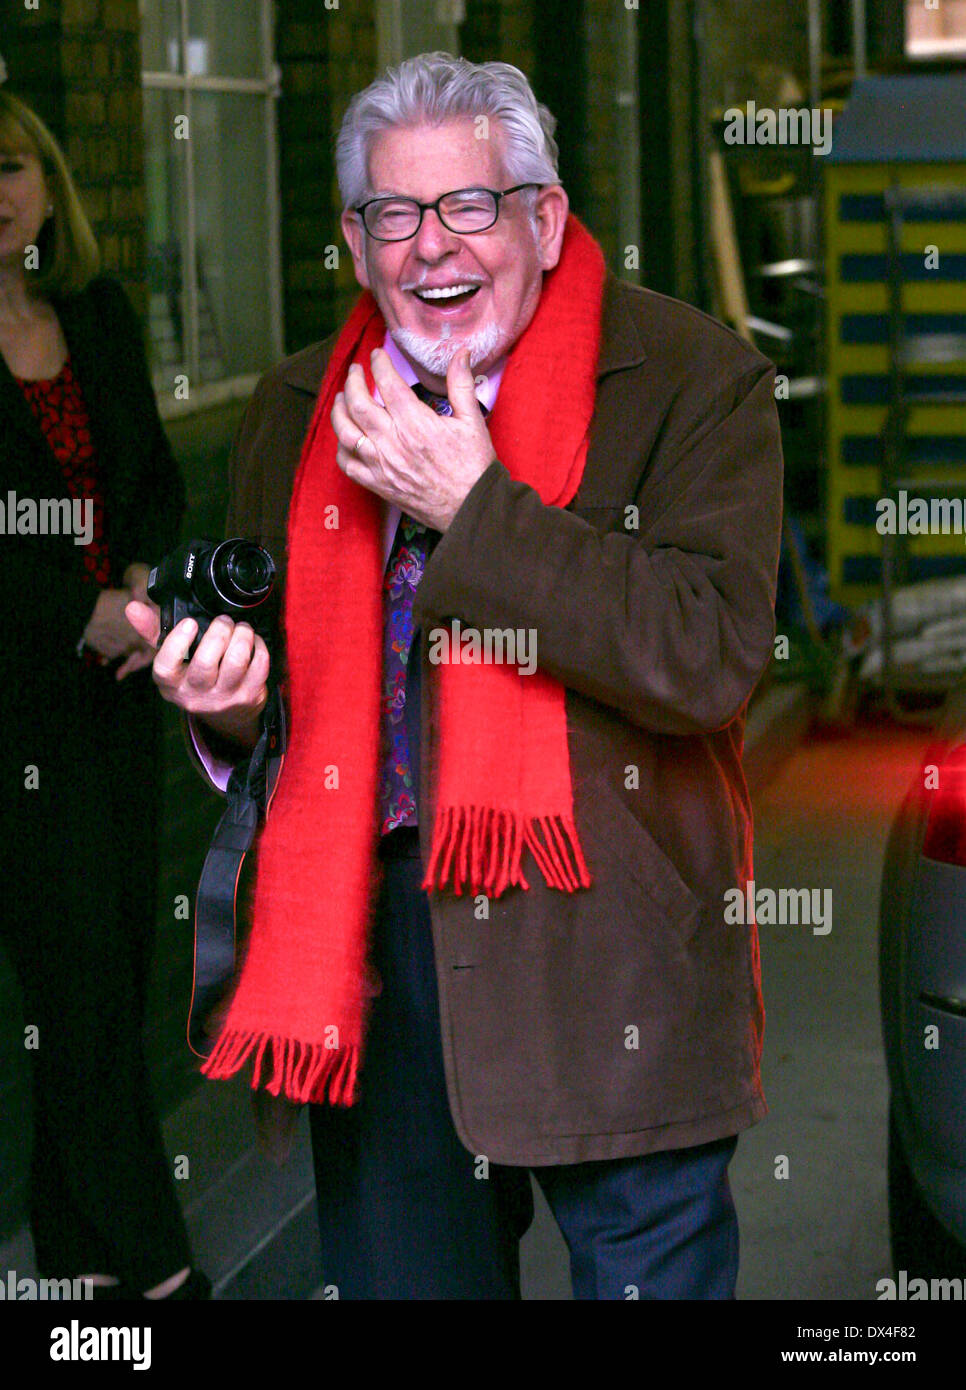 Rolf Harris at the ITV studios London, England - 18.10.12 Featuring: Rolf Harris Where: London, United Kingdom When: 18 Oct 201 Stock Photo